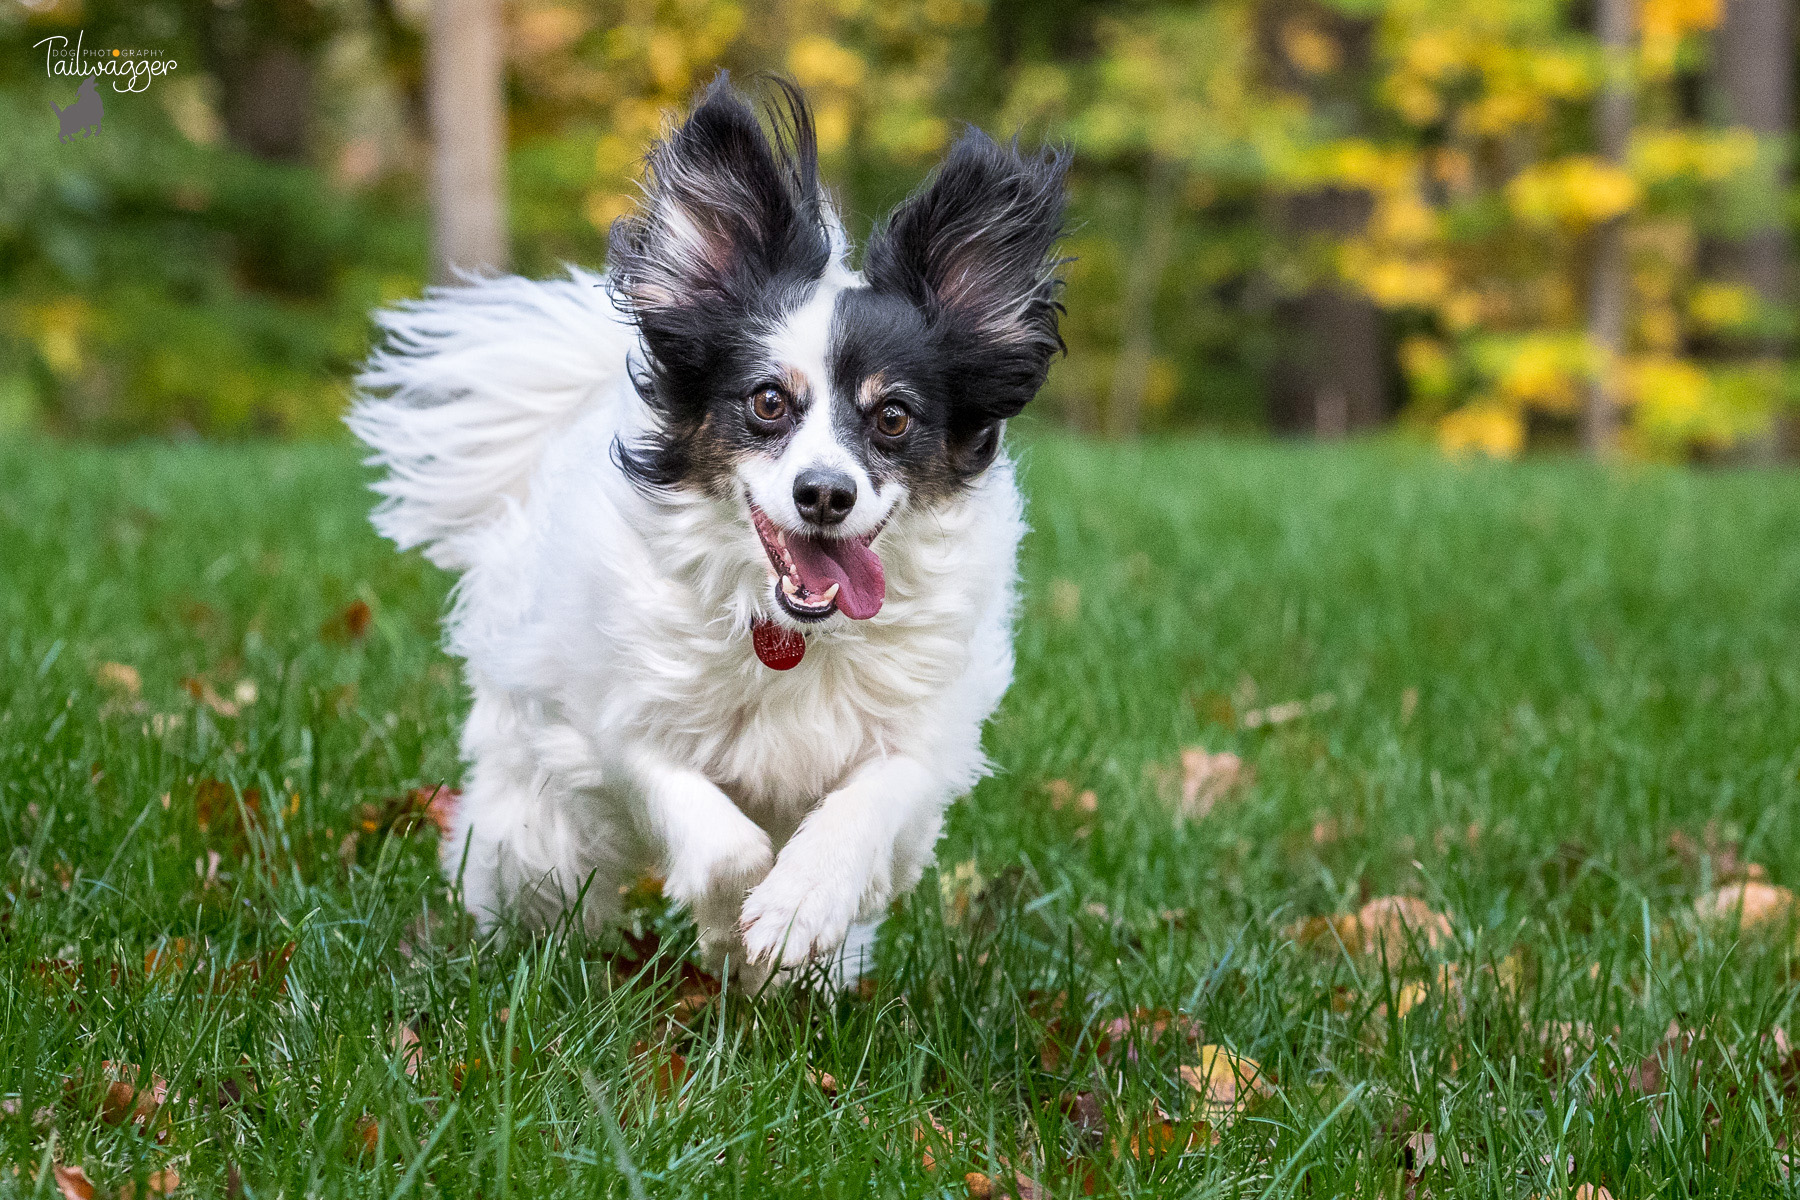 A Papillion mix runs through the grass with his tongue handing out.